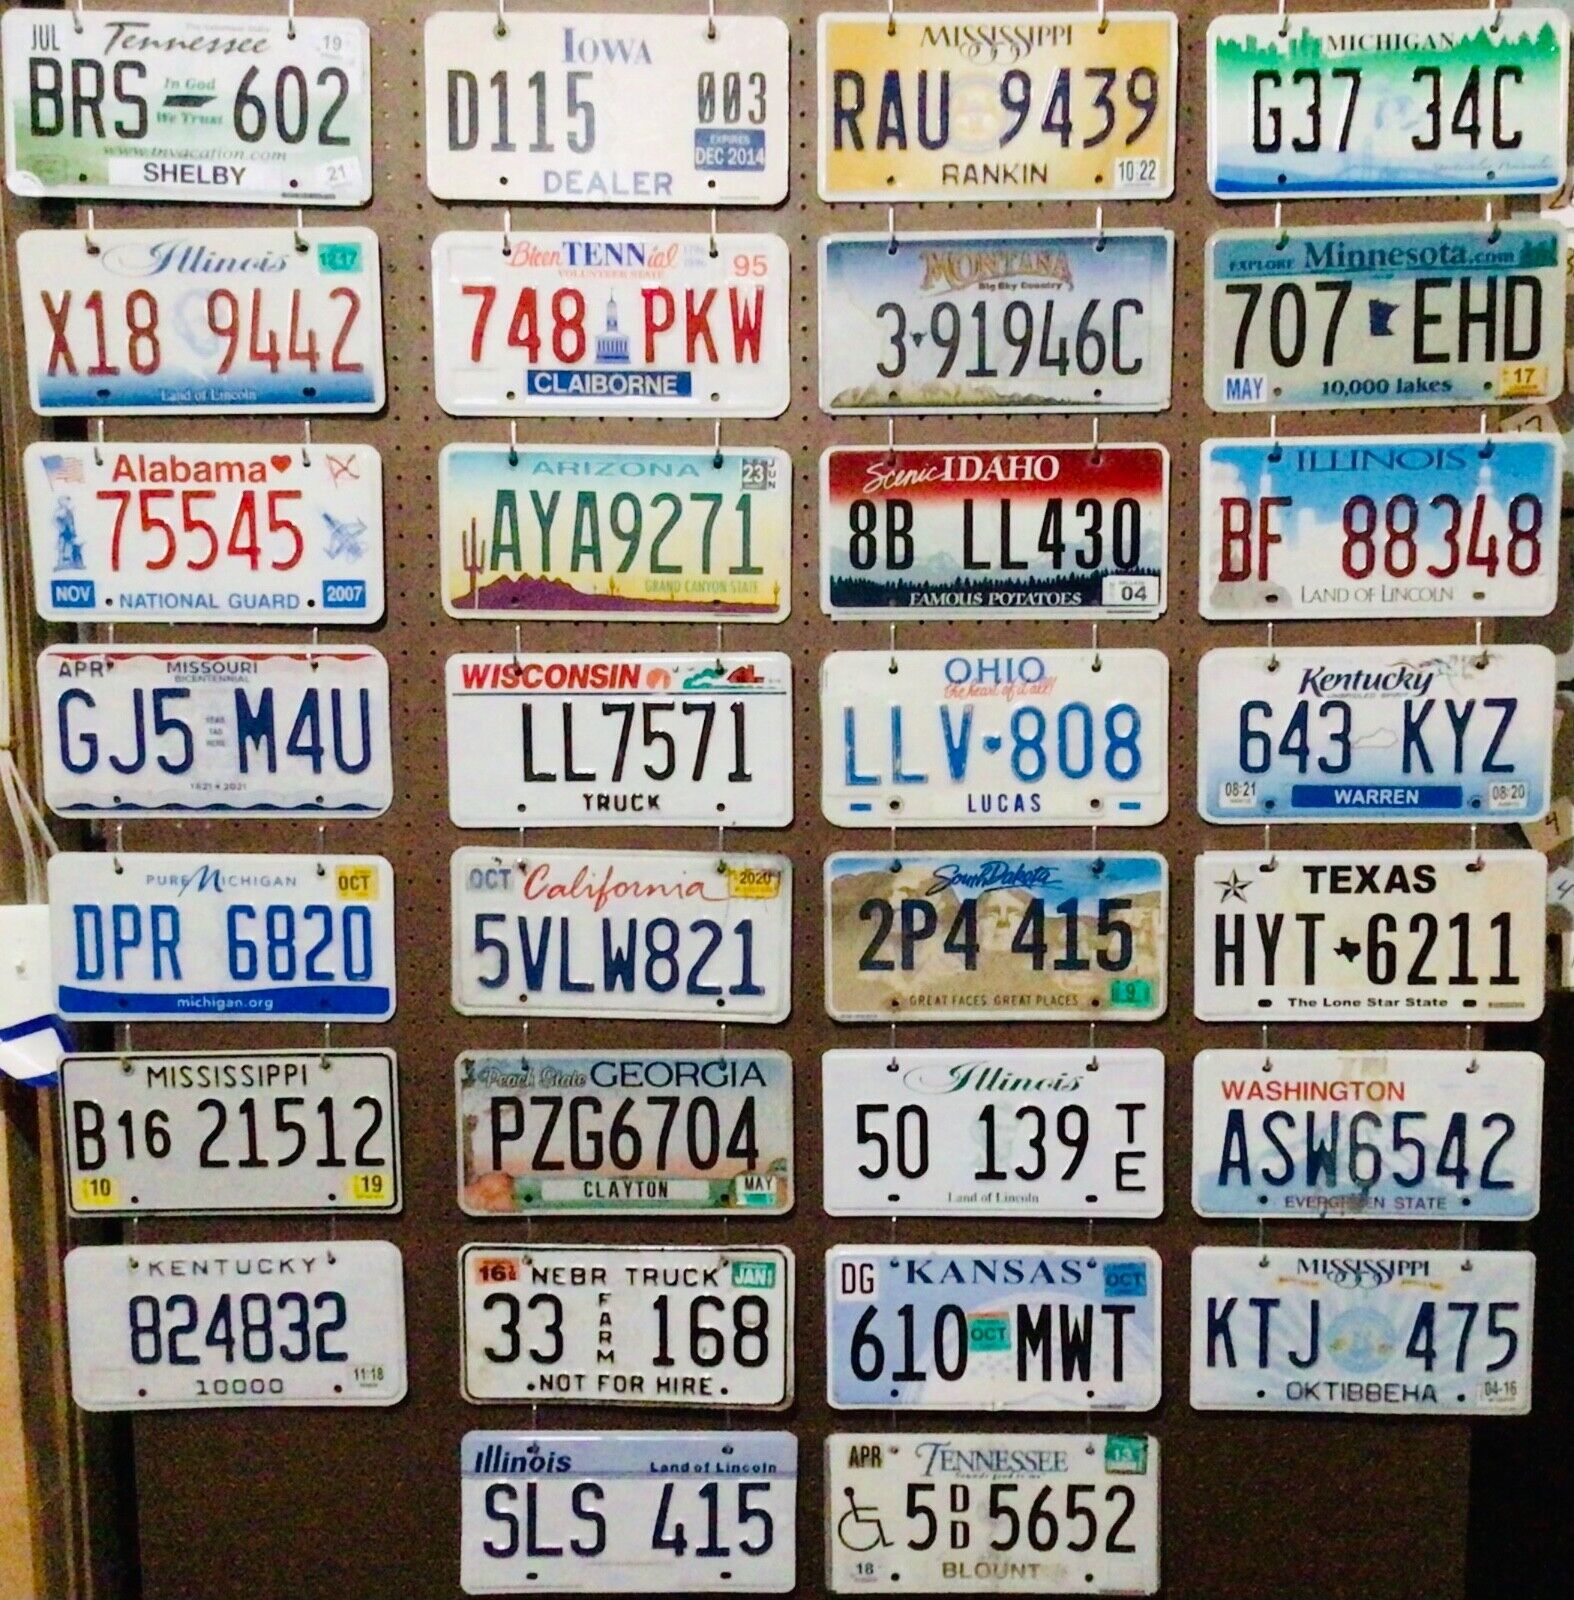 Large lot colorful of 30 old license plates - bulk - many states - low shipping